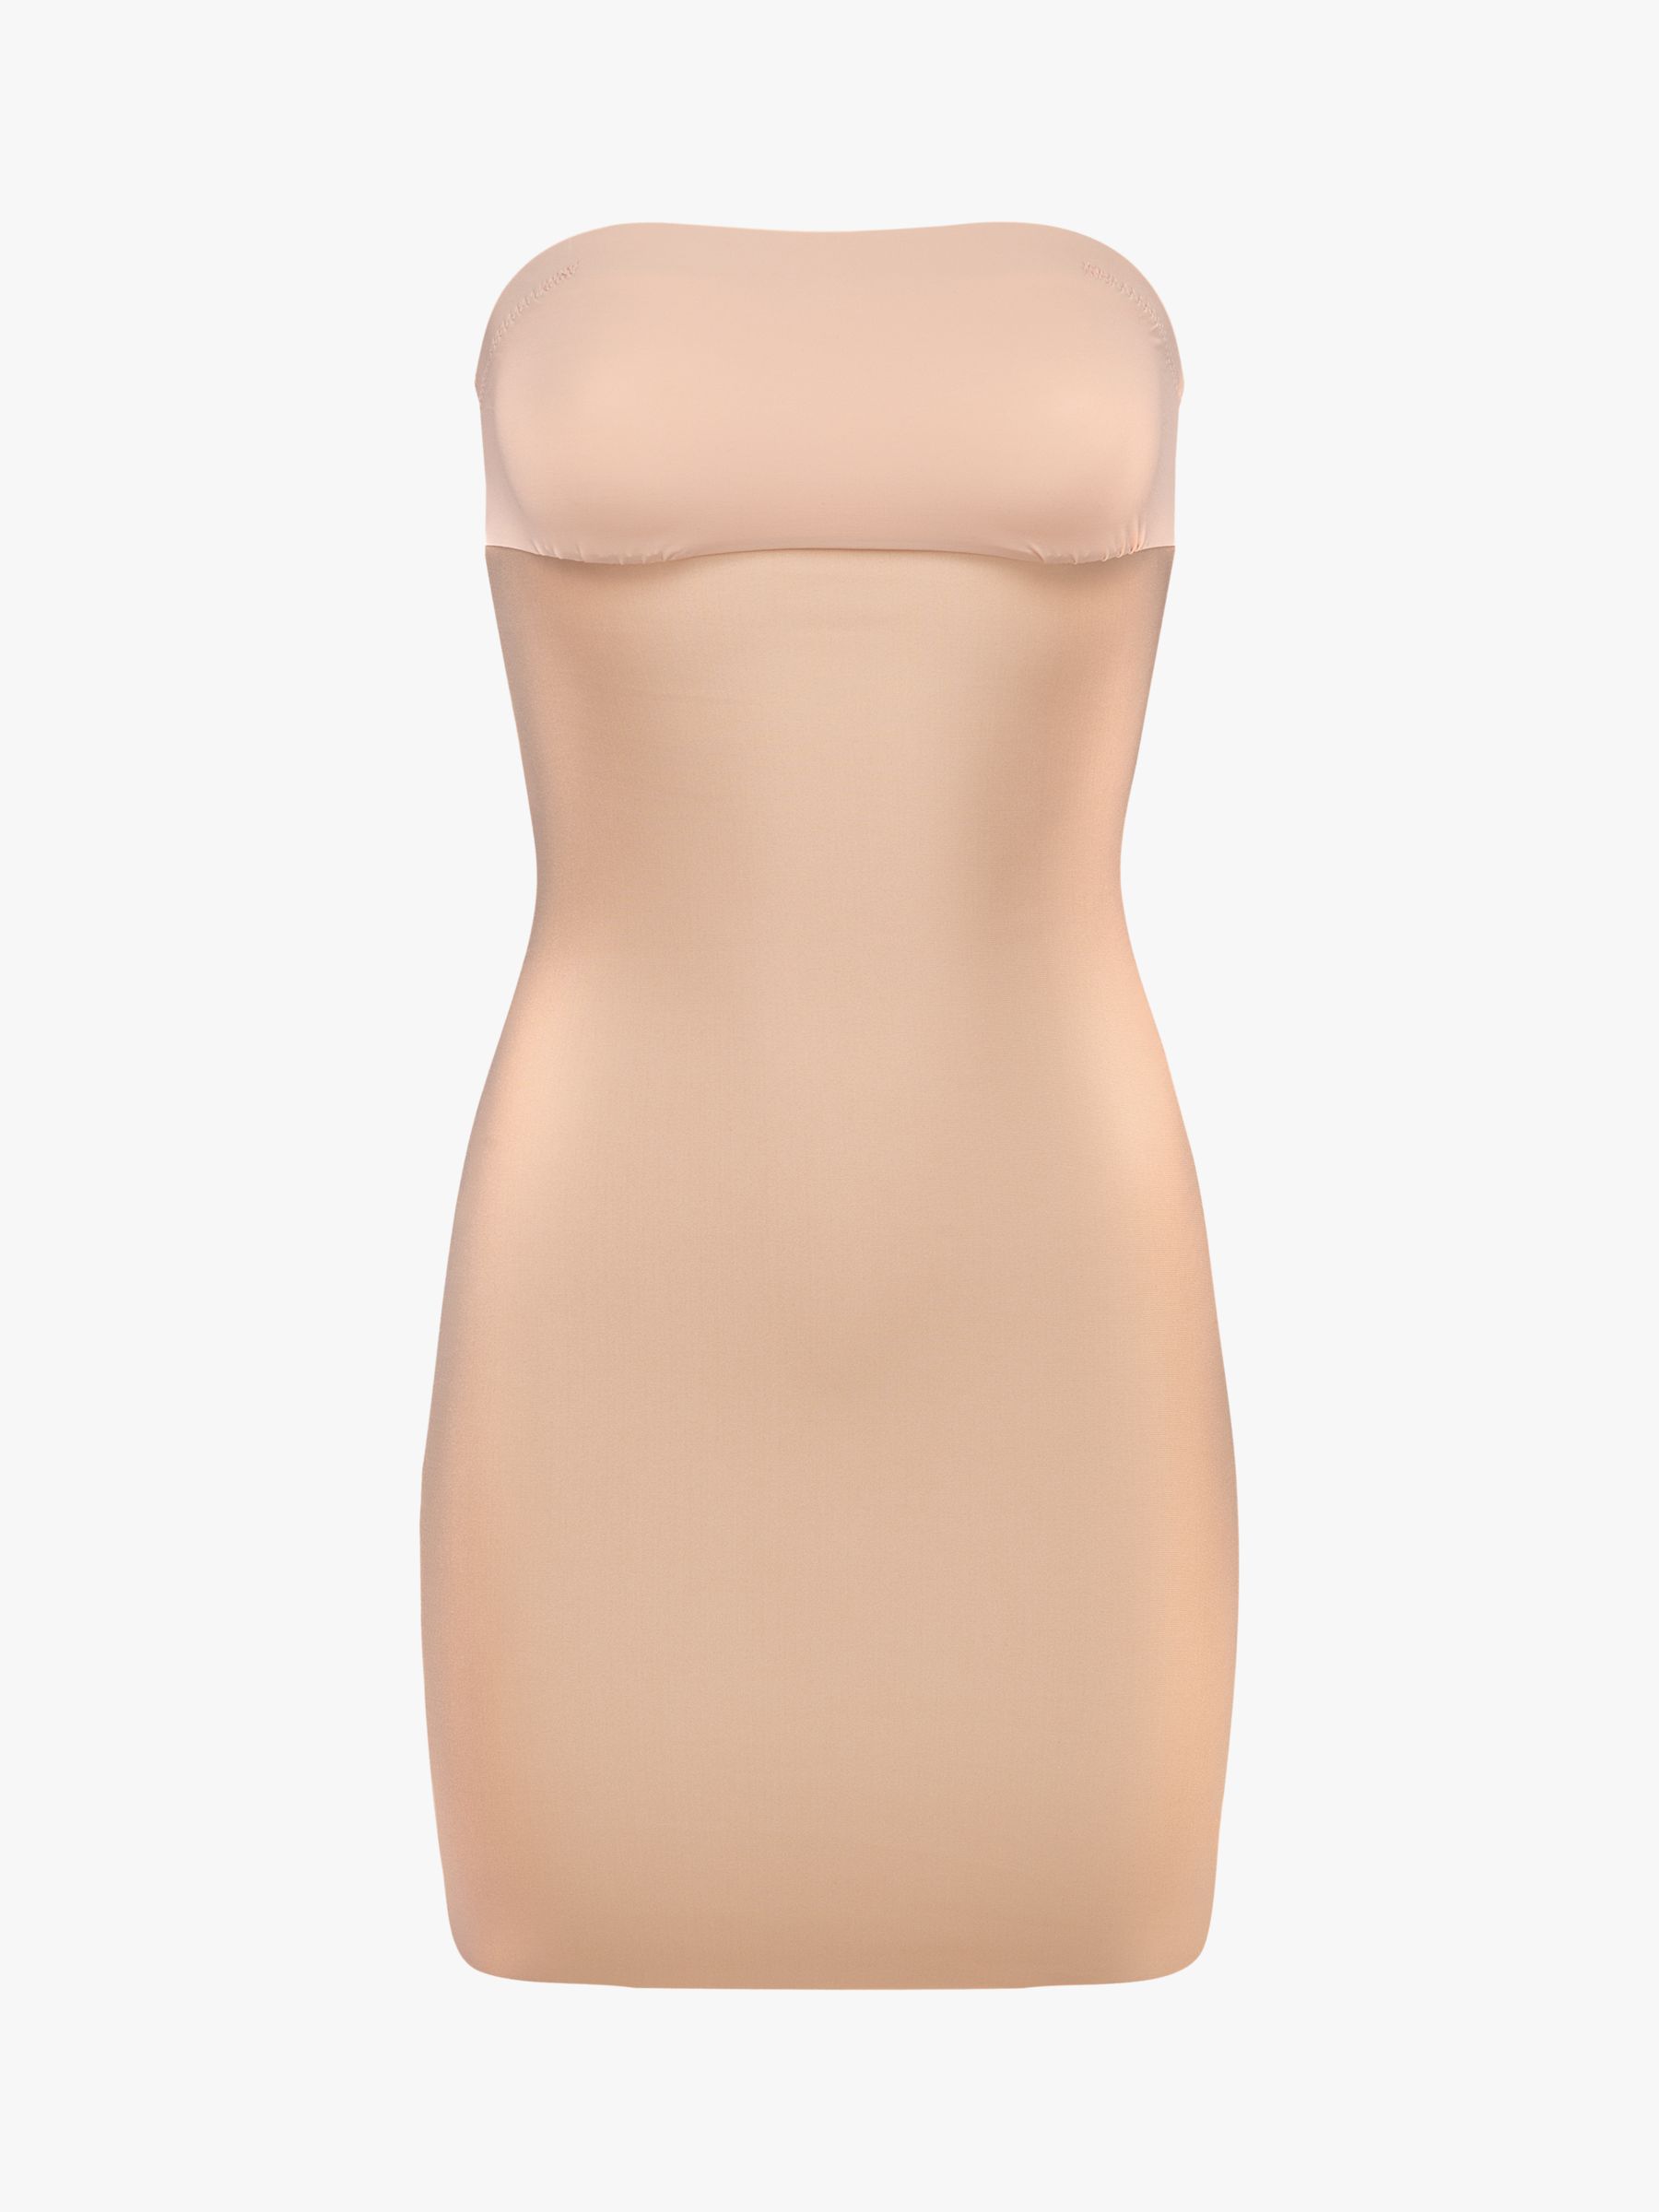 Commando Seamless Two-Faced Tech Control Strapless Slip, Beige at